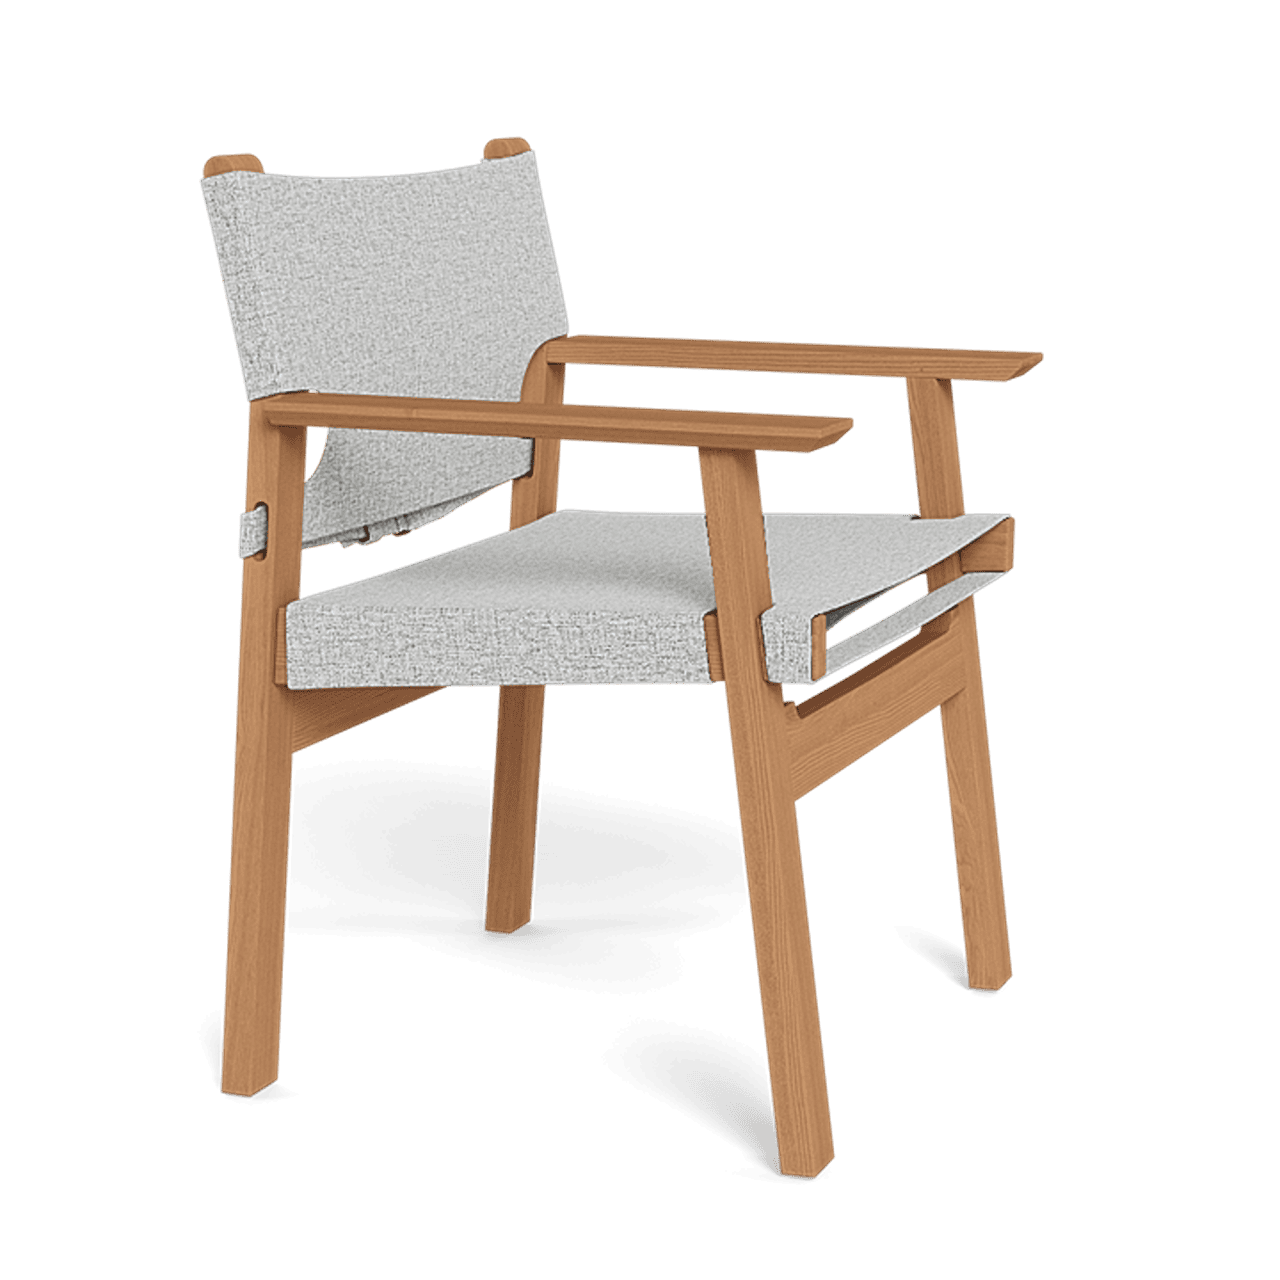 MLB DINING CHAIR-Teak natural frame with copacabana sand fabric